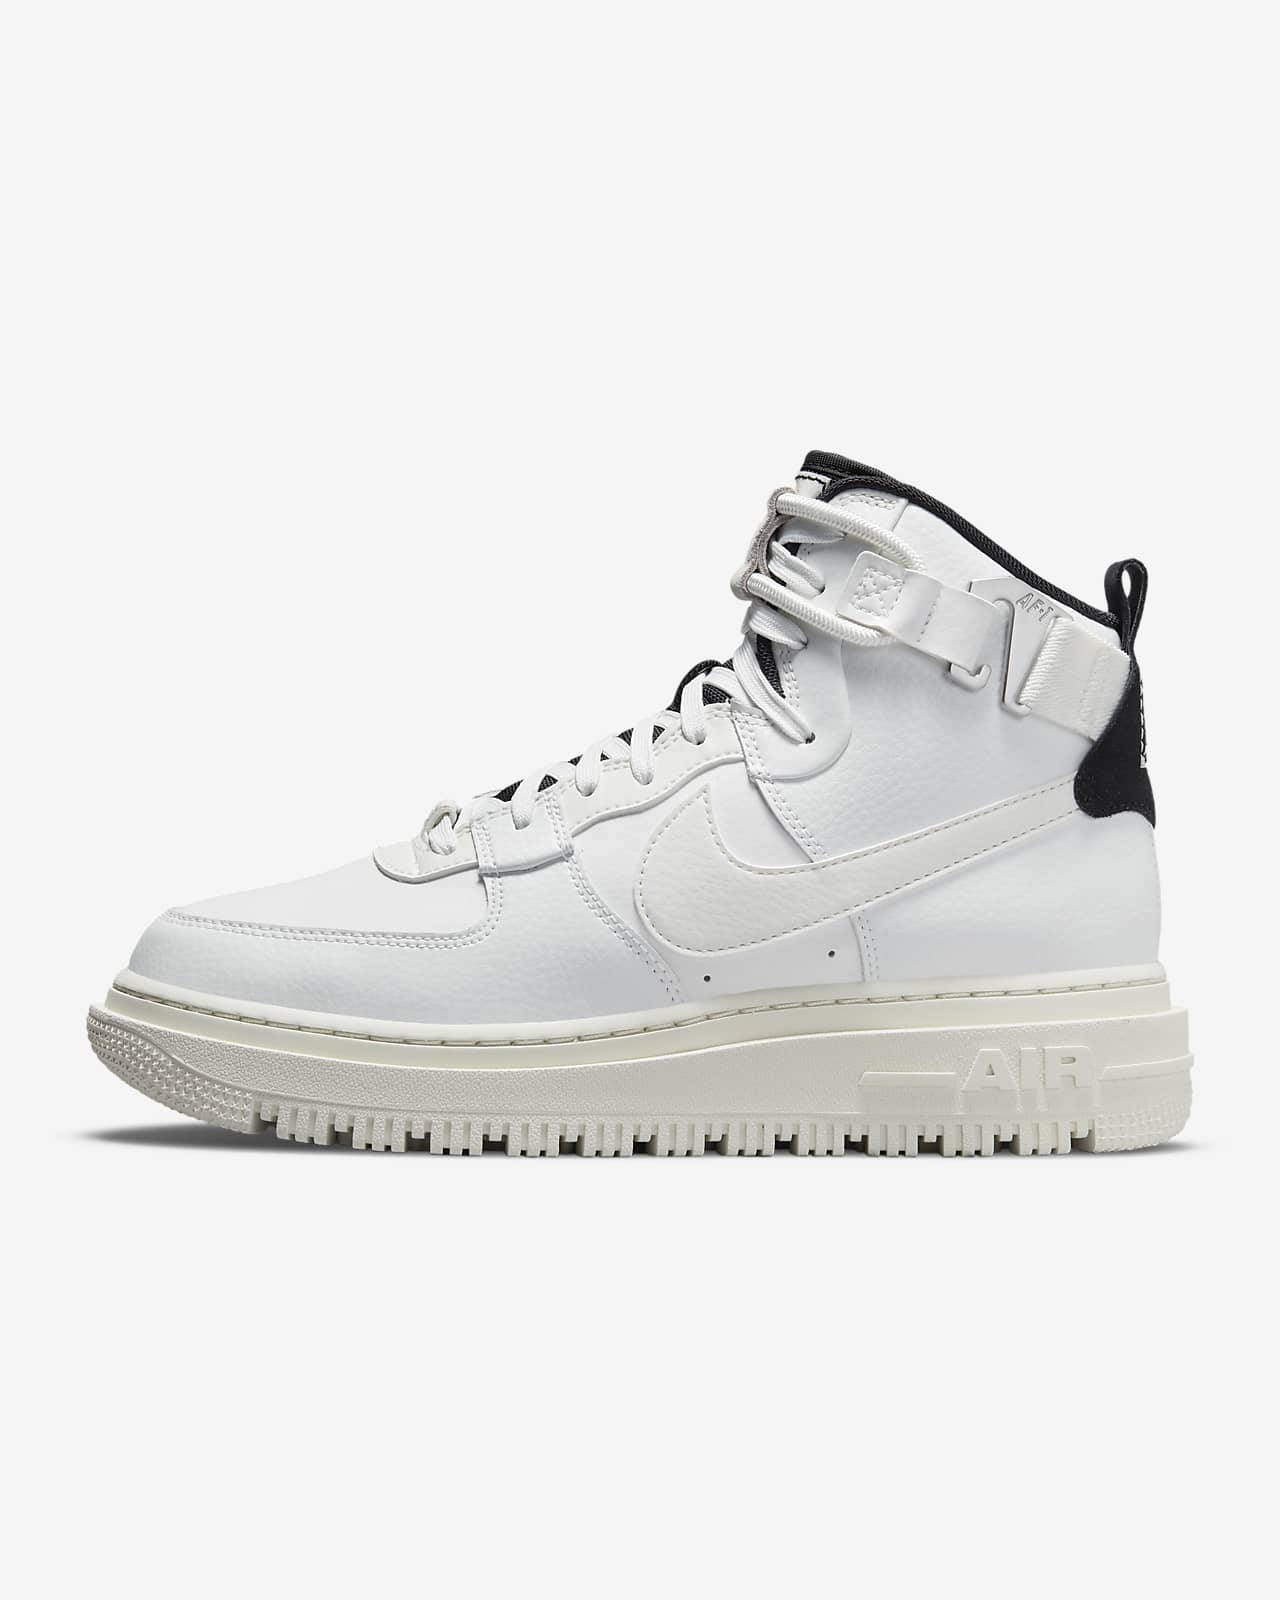 Botte Nike Air Force 1 High Utility 2.0 pour Femme